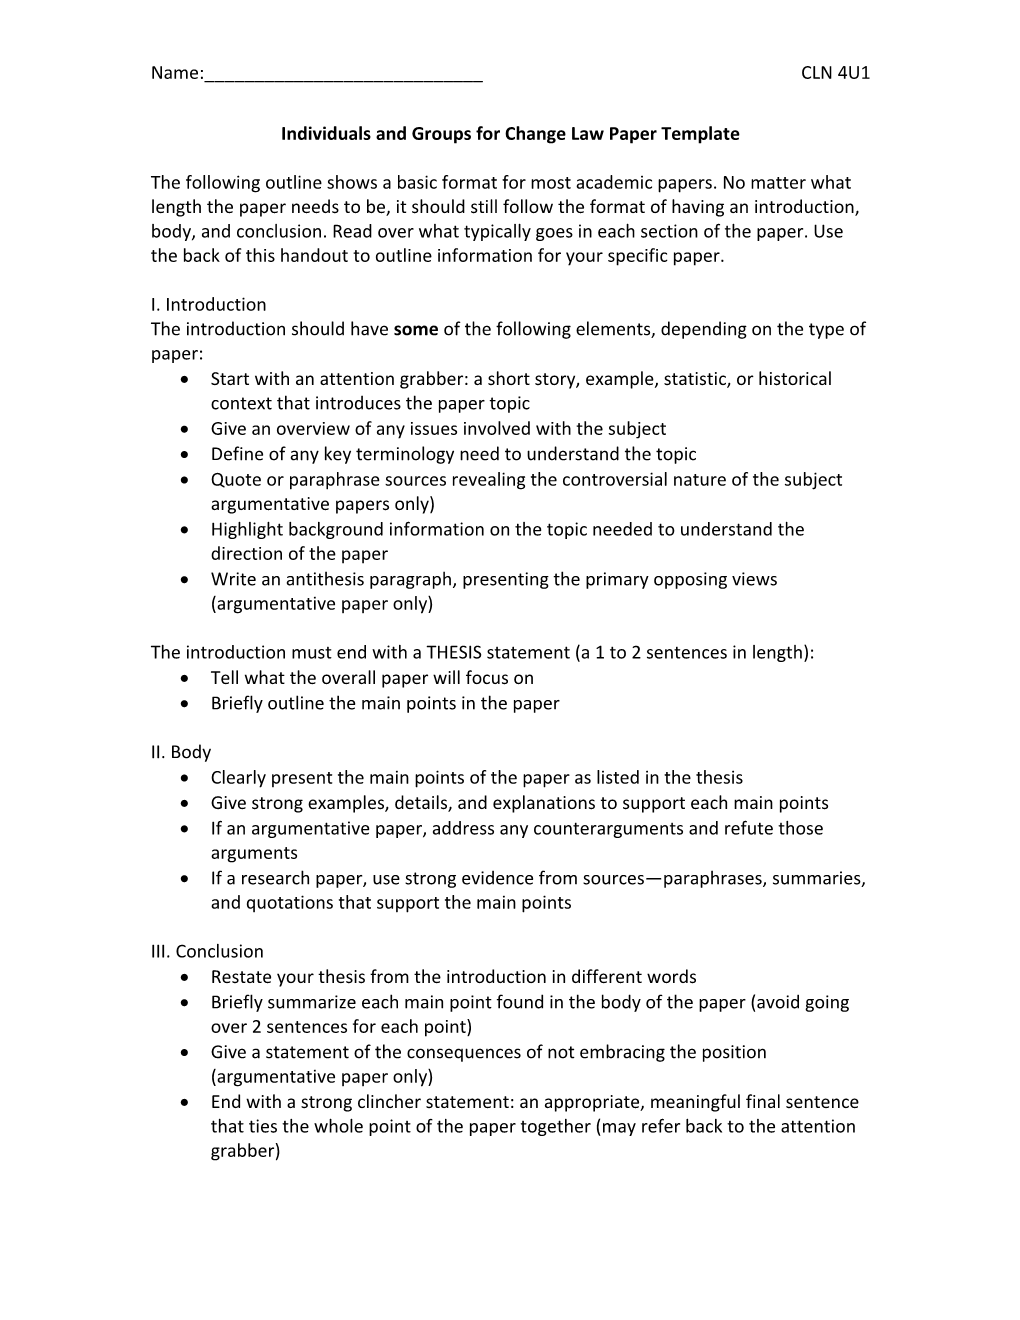 Individuals and Groups for Change Law Paper Template